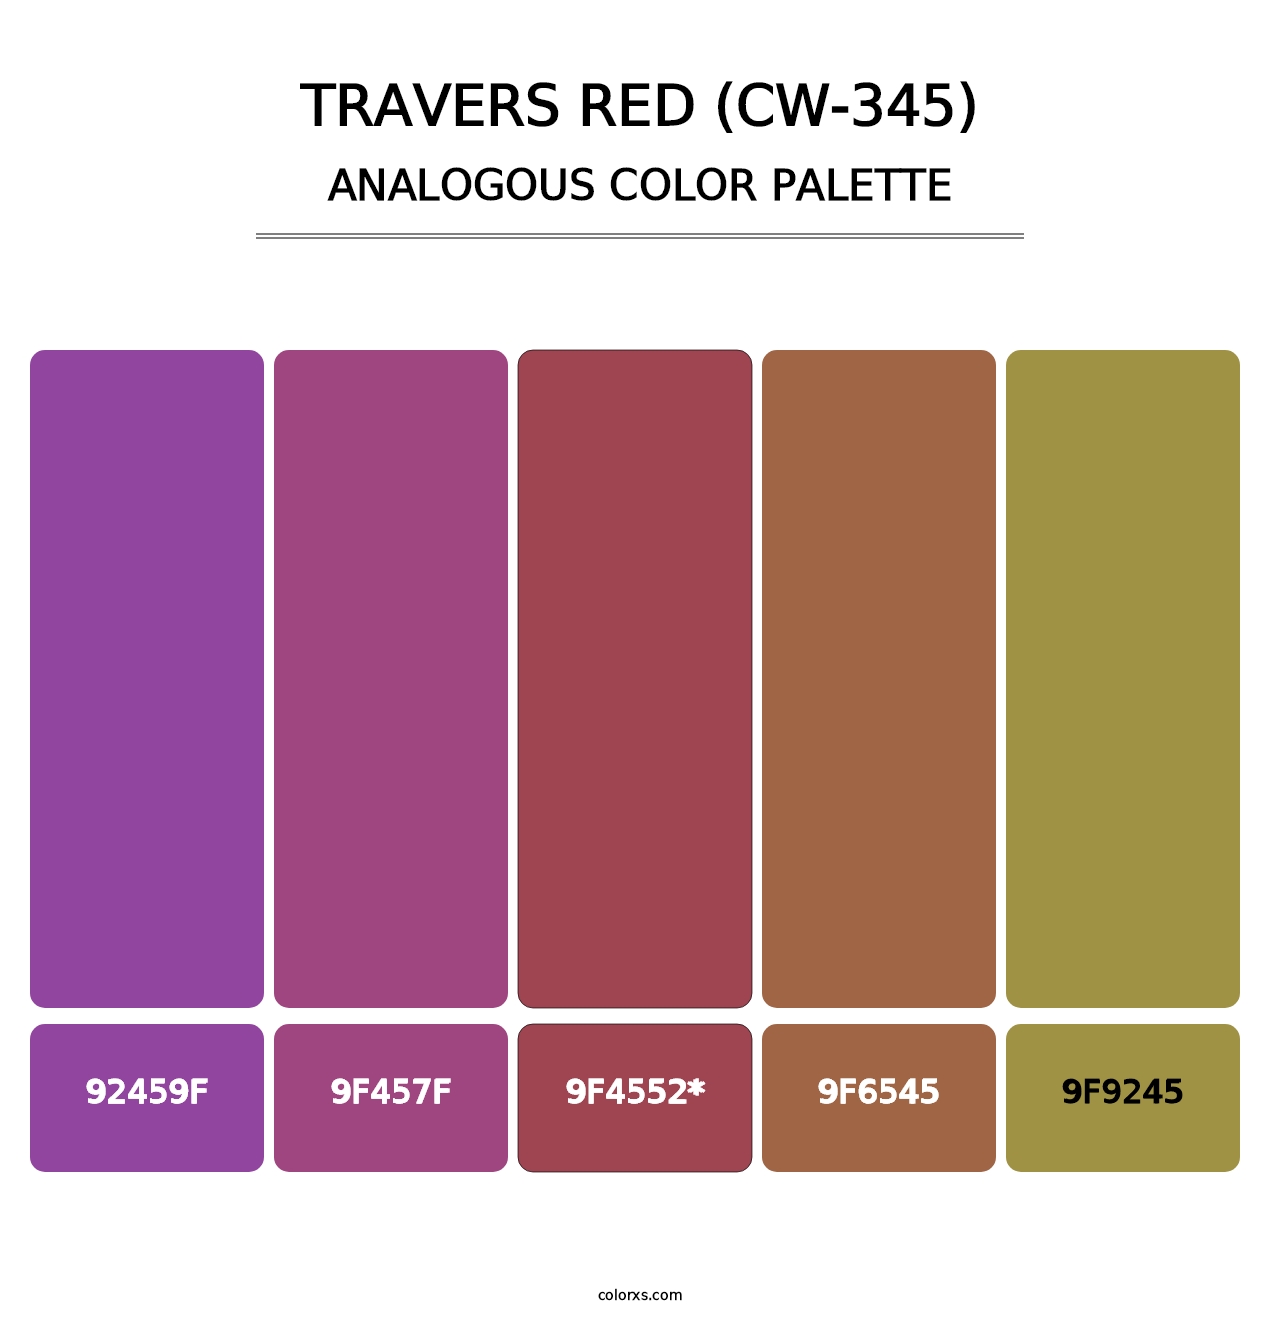 Travers Red (CW-345) - Analogous Color Palette